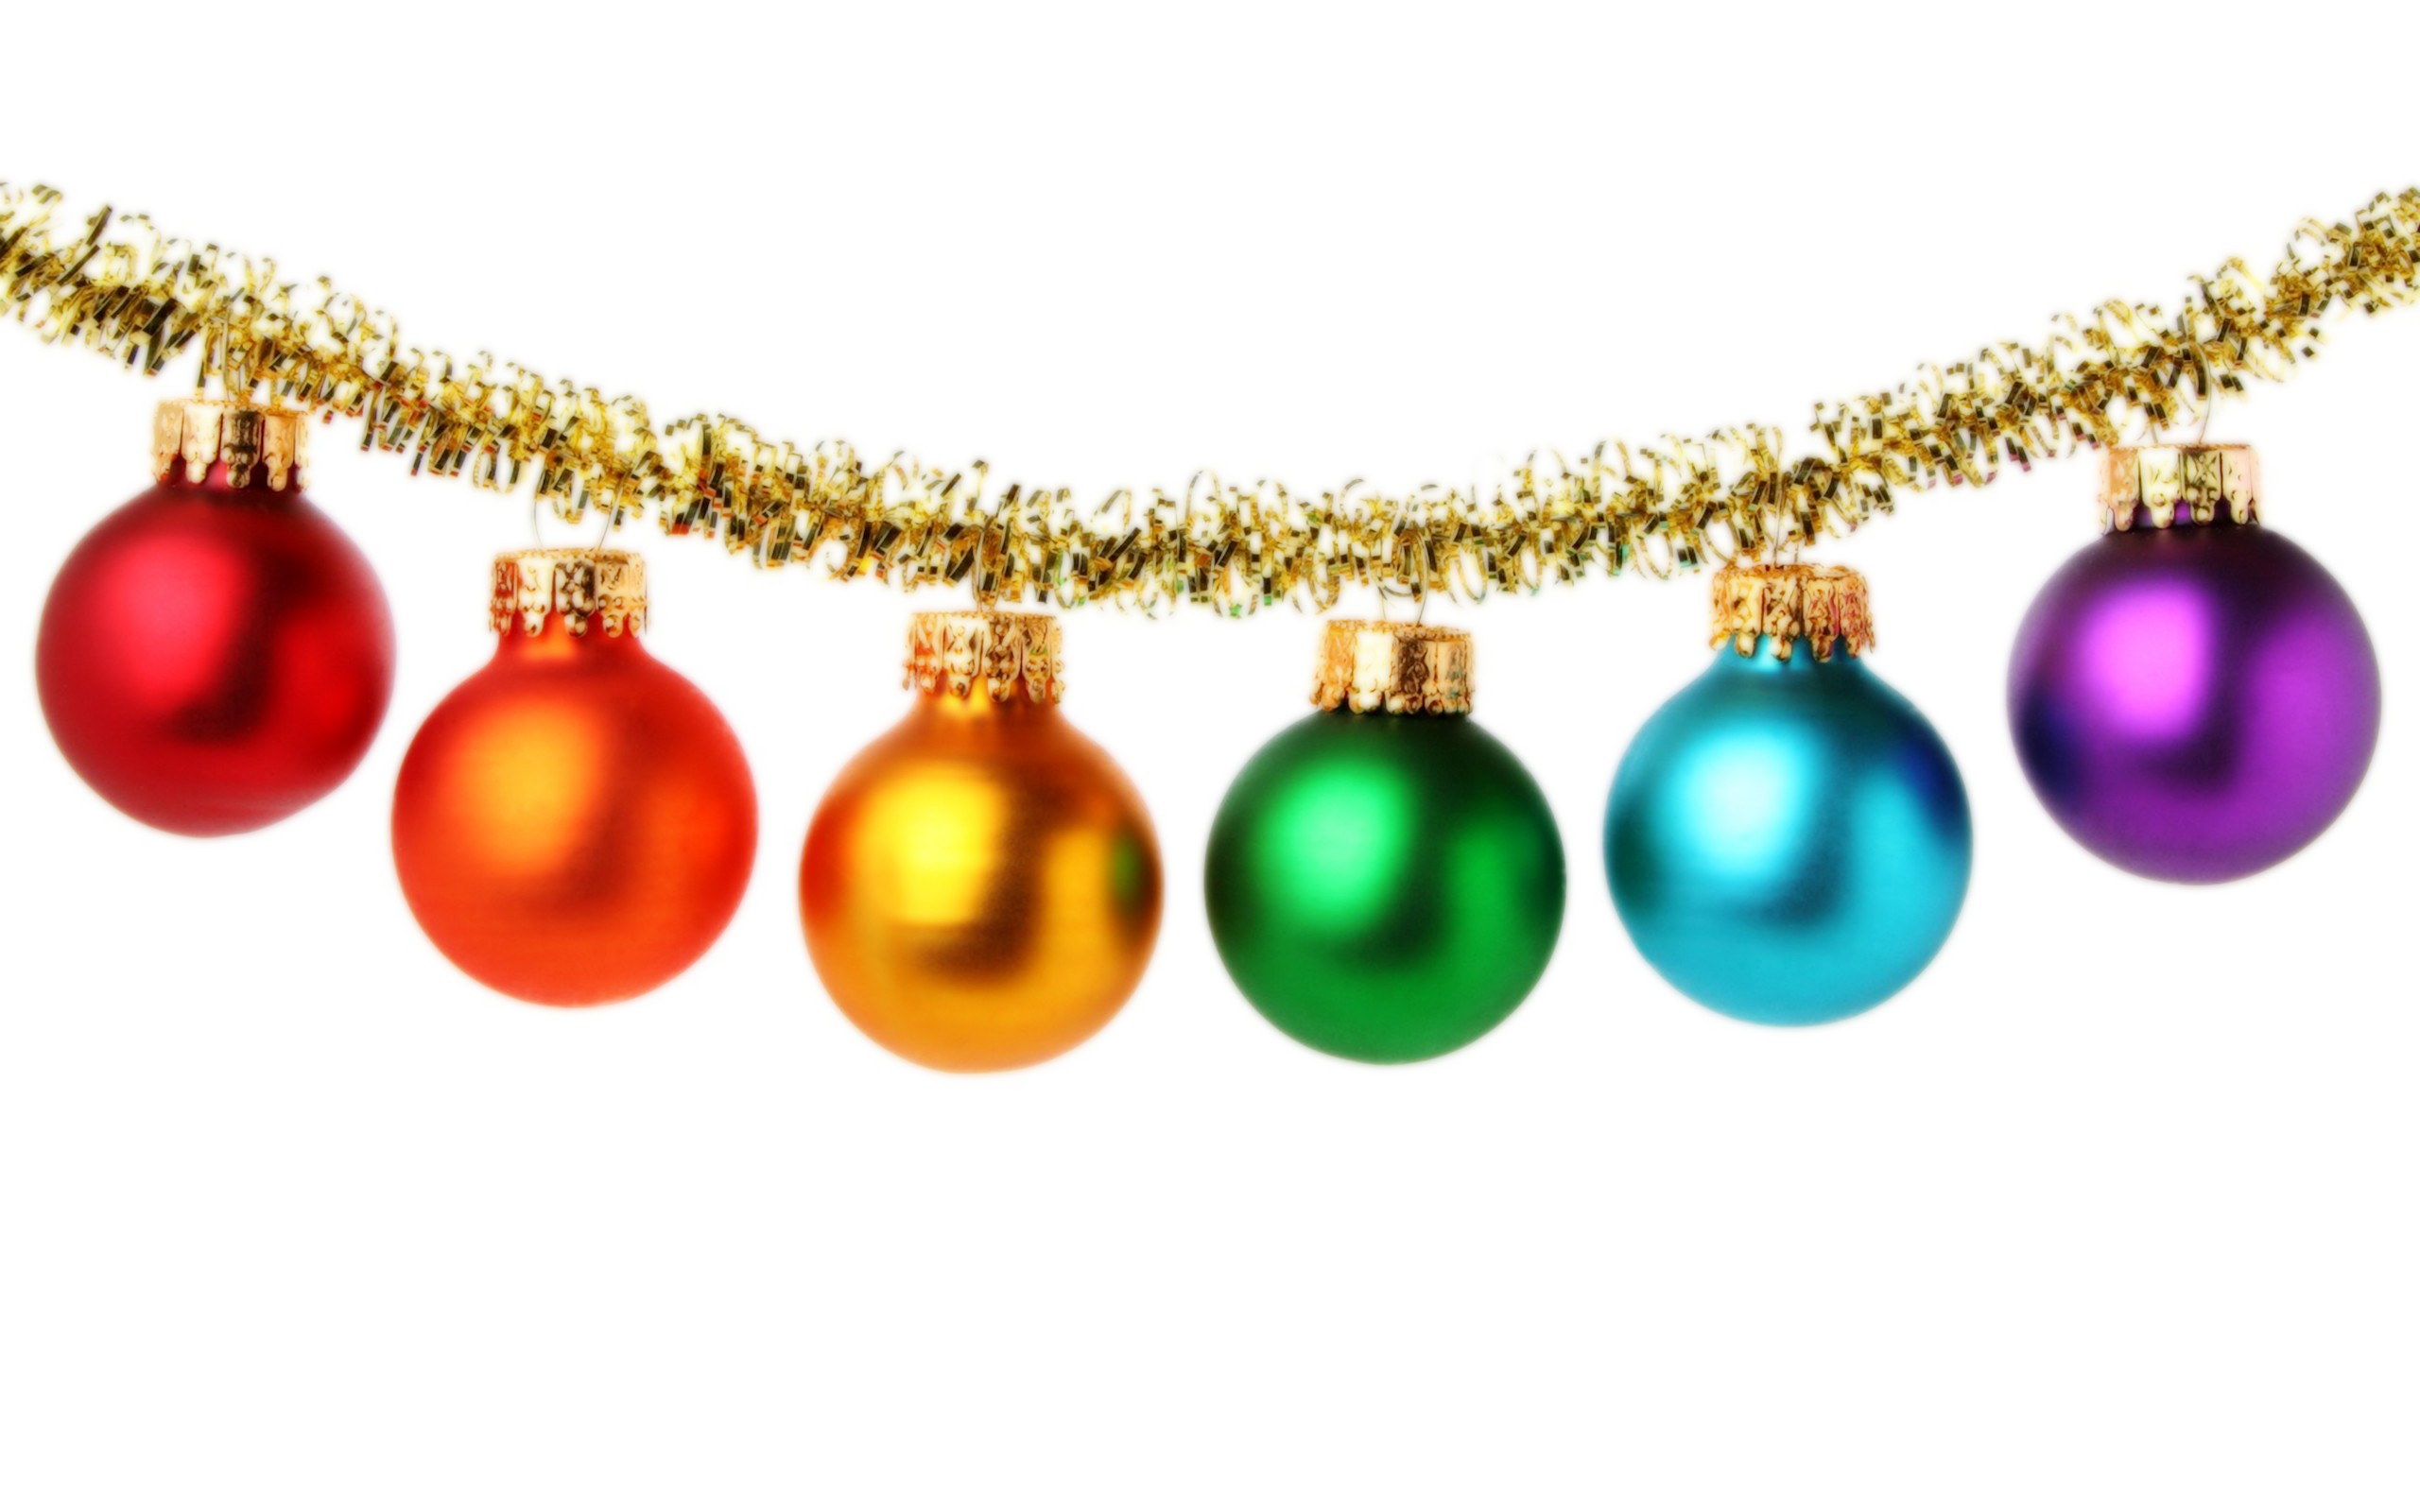 General 2560x1600 New Year Christmas ornaments  Christmas simple background holiday